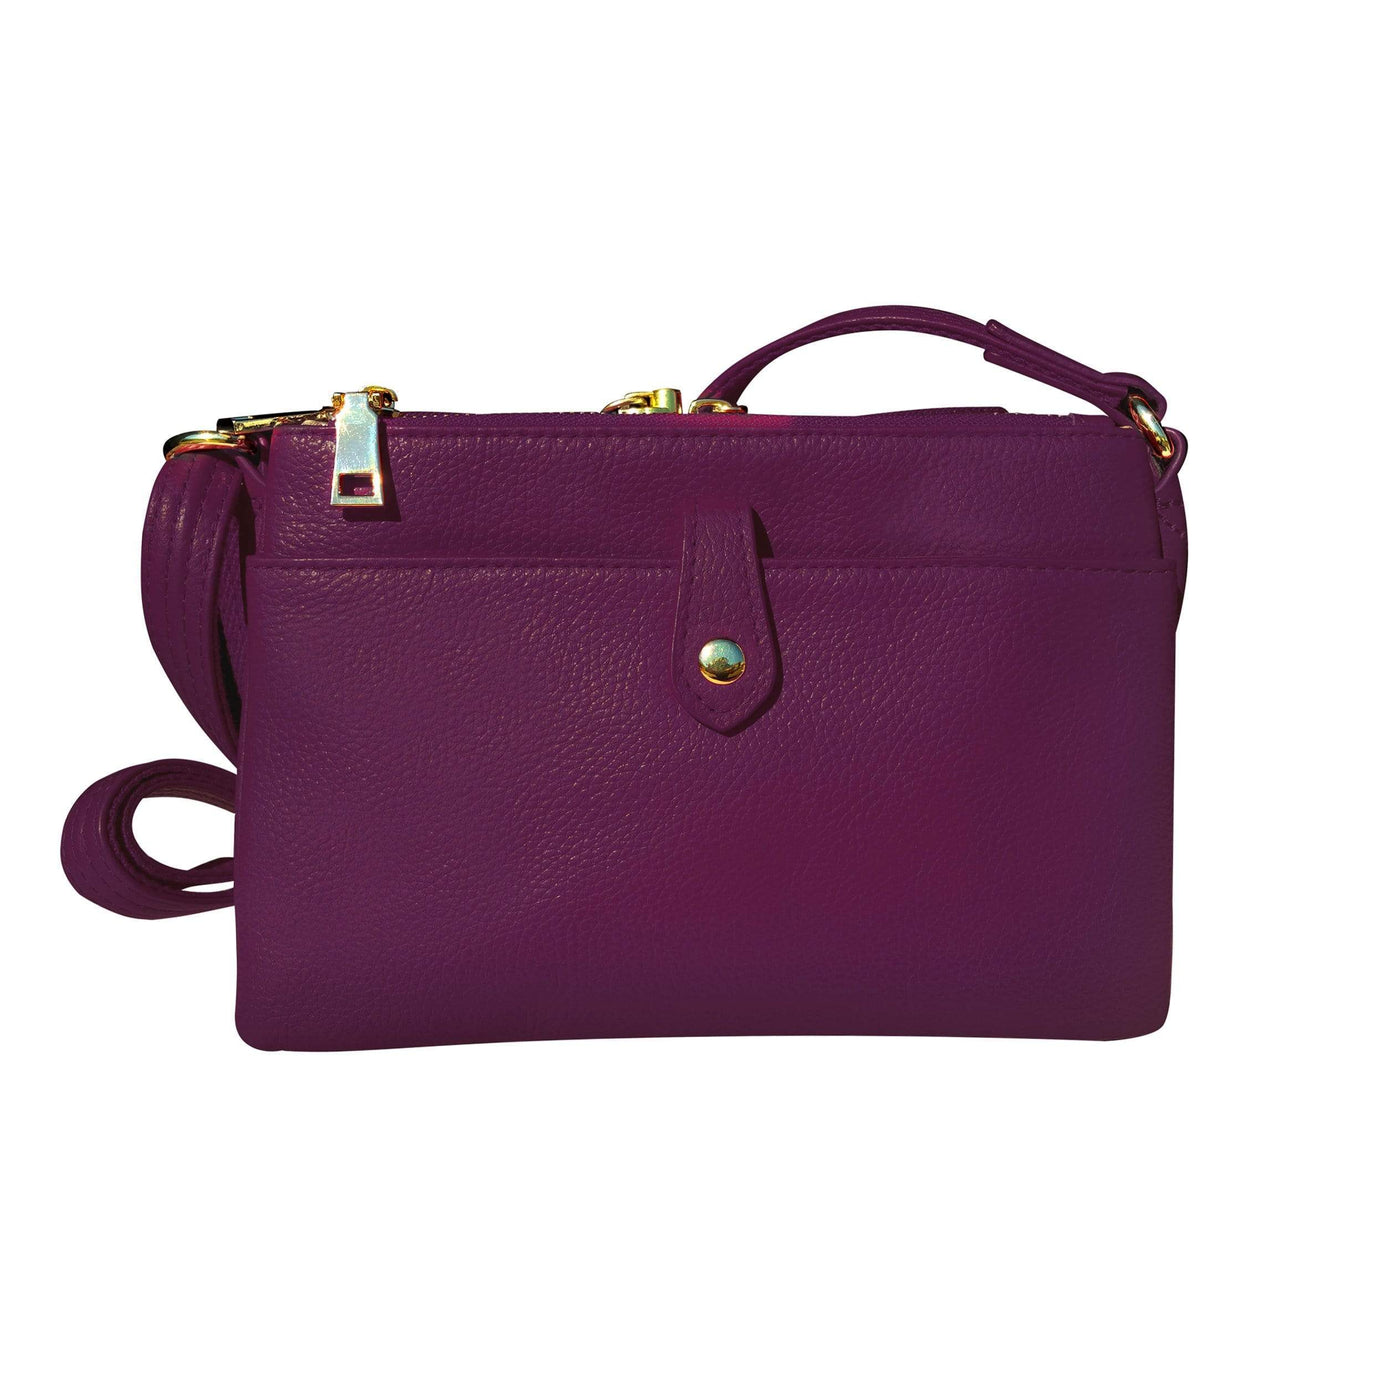 roma leathers concealed carry purse purple concealed carry small crossbody by roma leathers